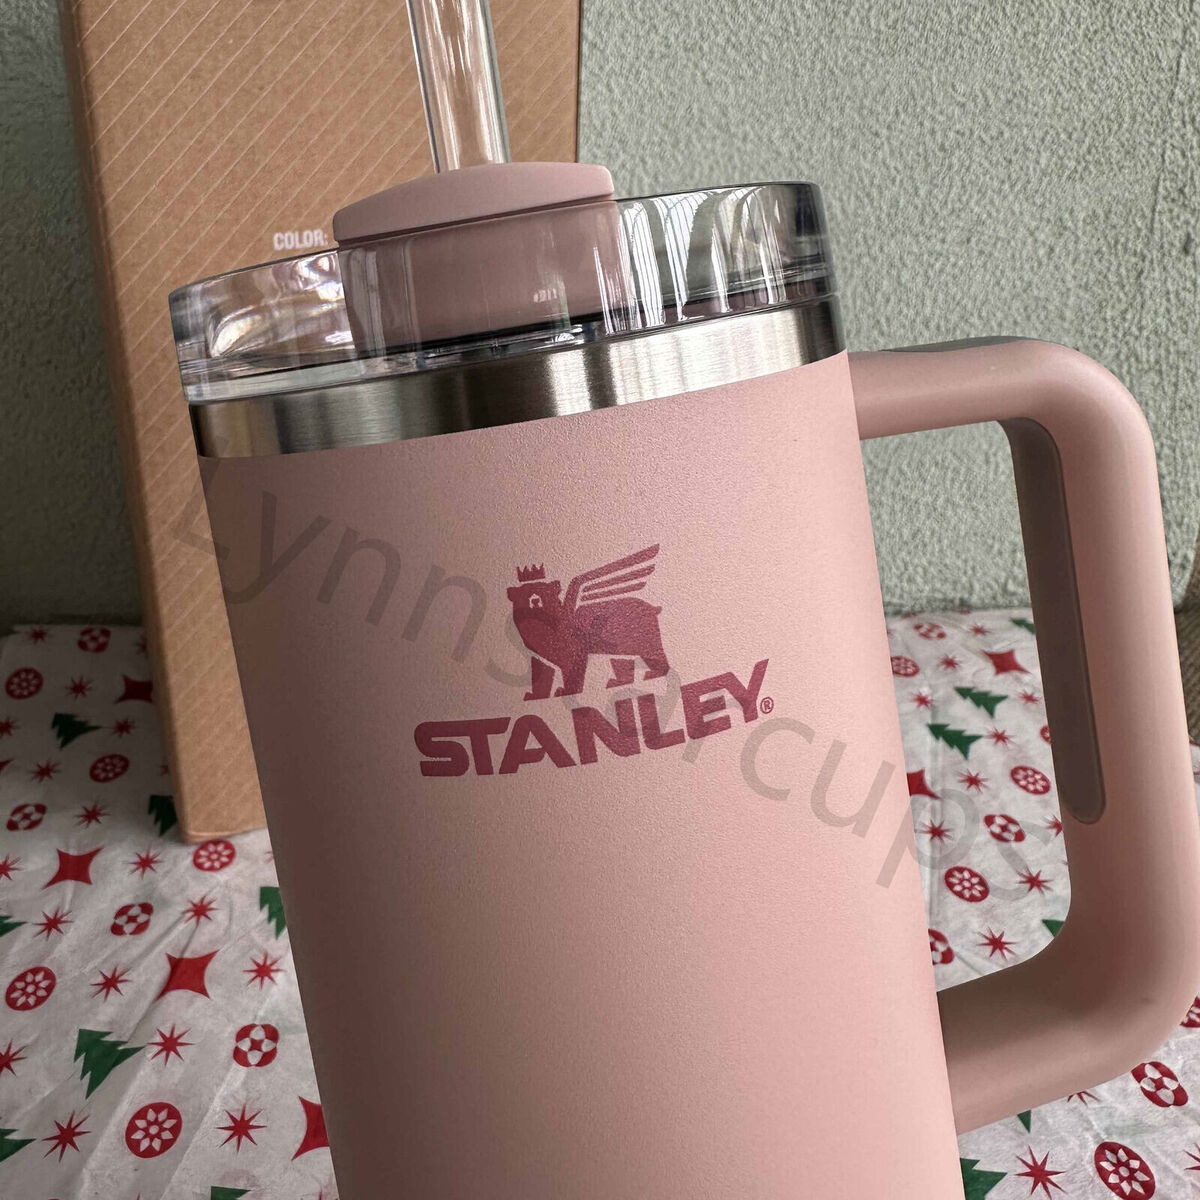 STANLEY Quencher H2.0 FlowState Tumbler 40oz (Pink Dusk):  Tumblers & Water Glasses